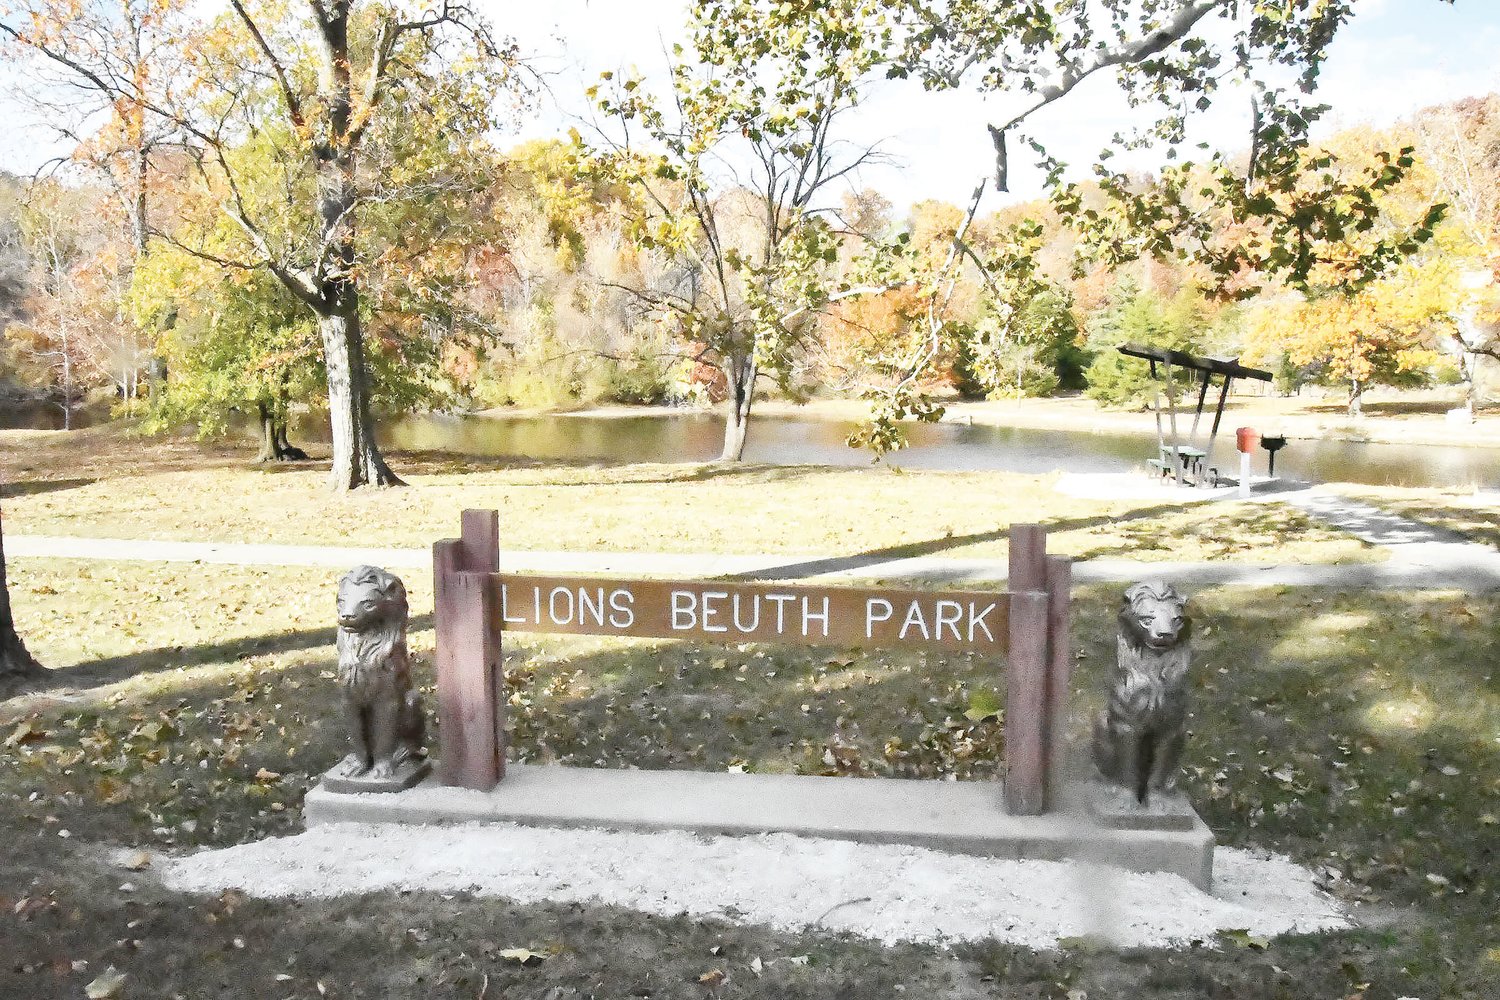 Lions Beuth Park is one of many open spaces available to residents here in Moberly.